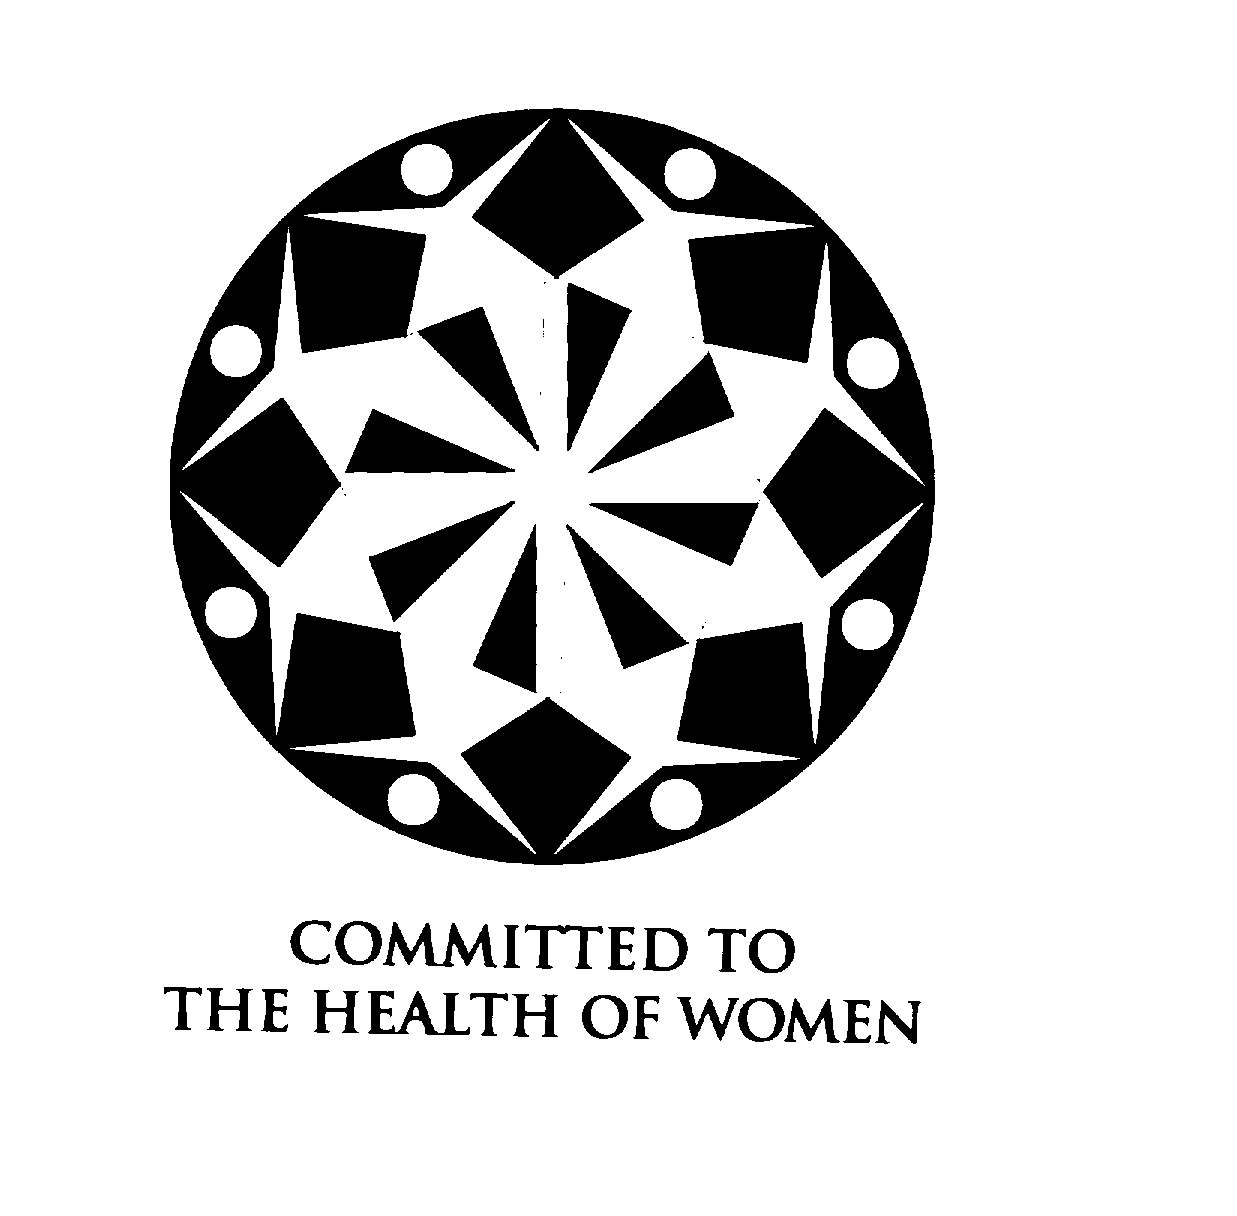  COMMITTED TO THE HEALTH OF WOMEN